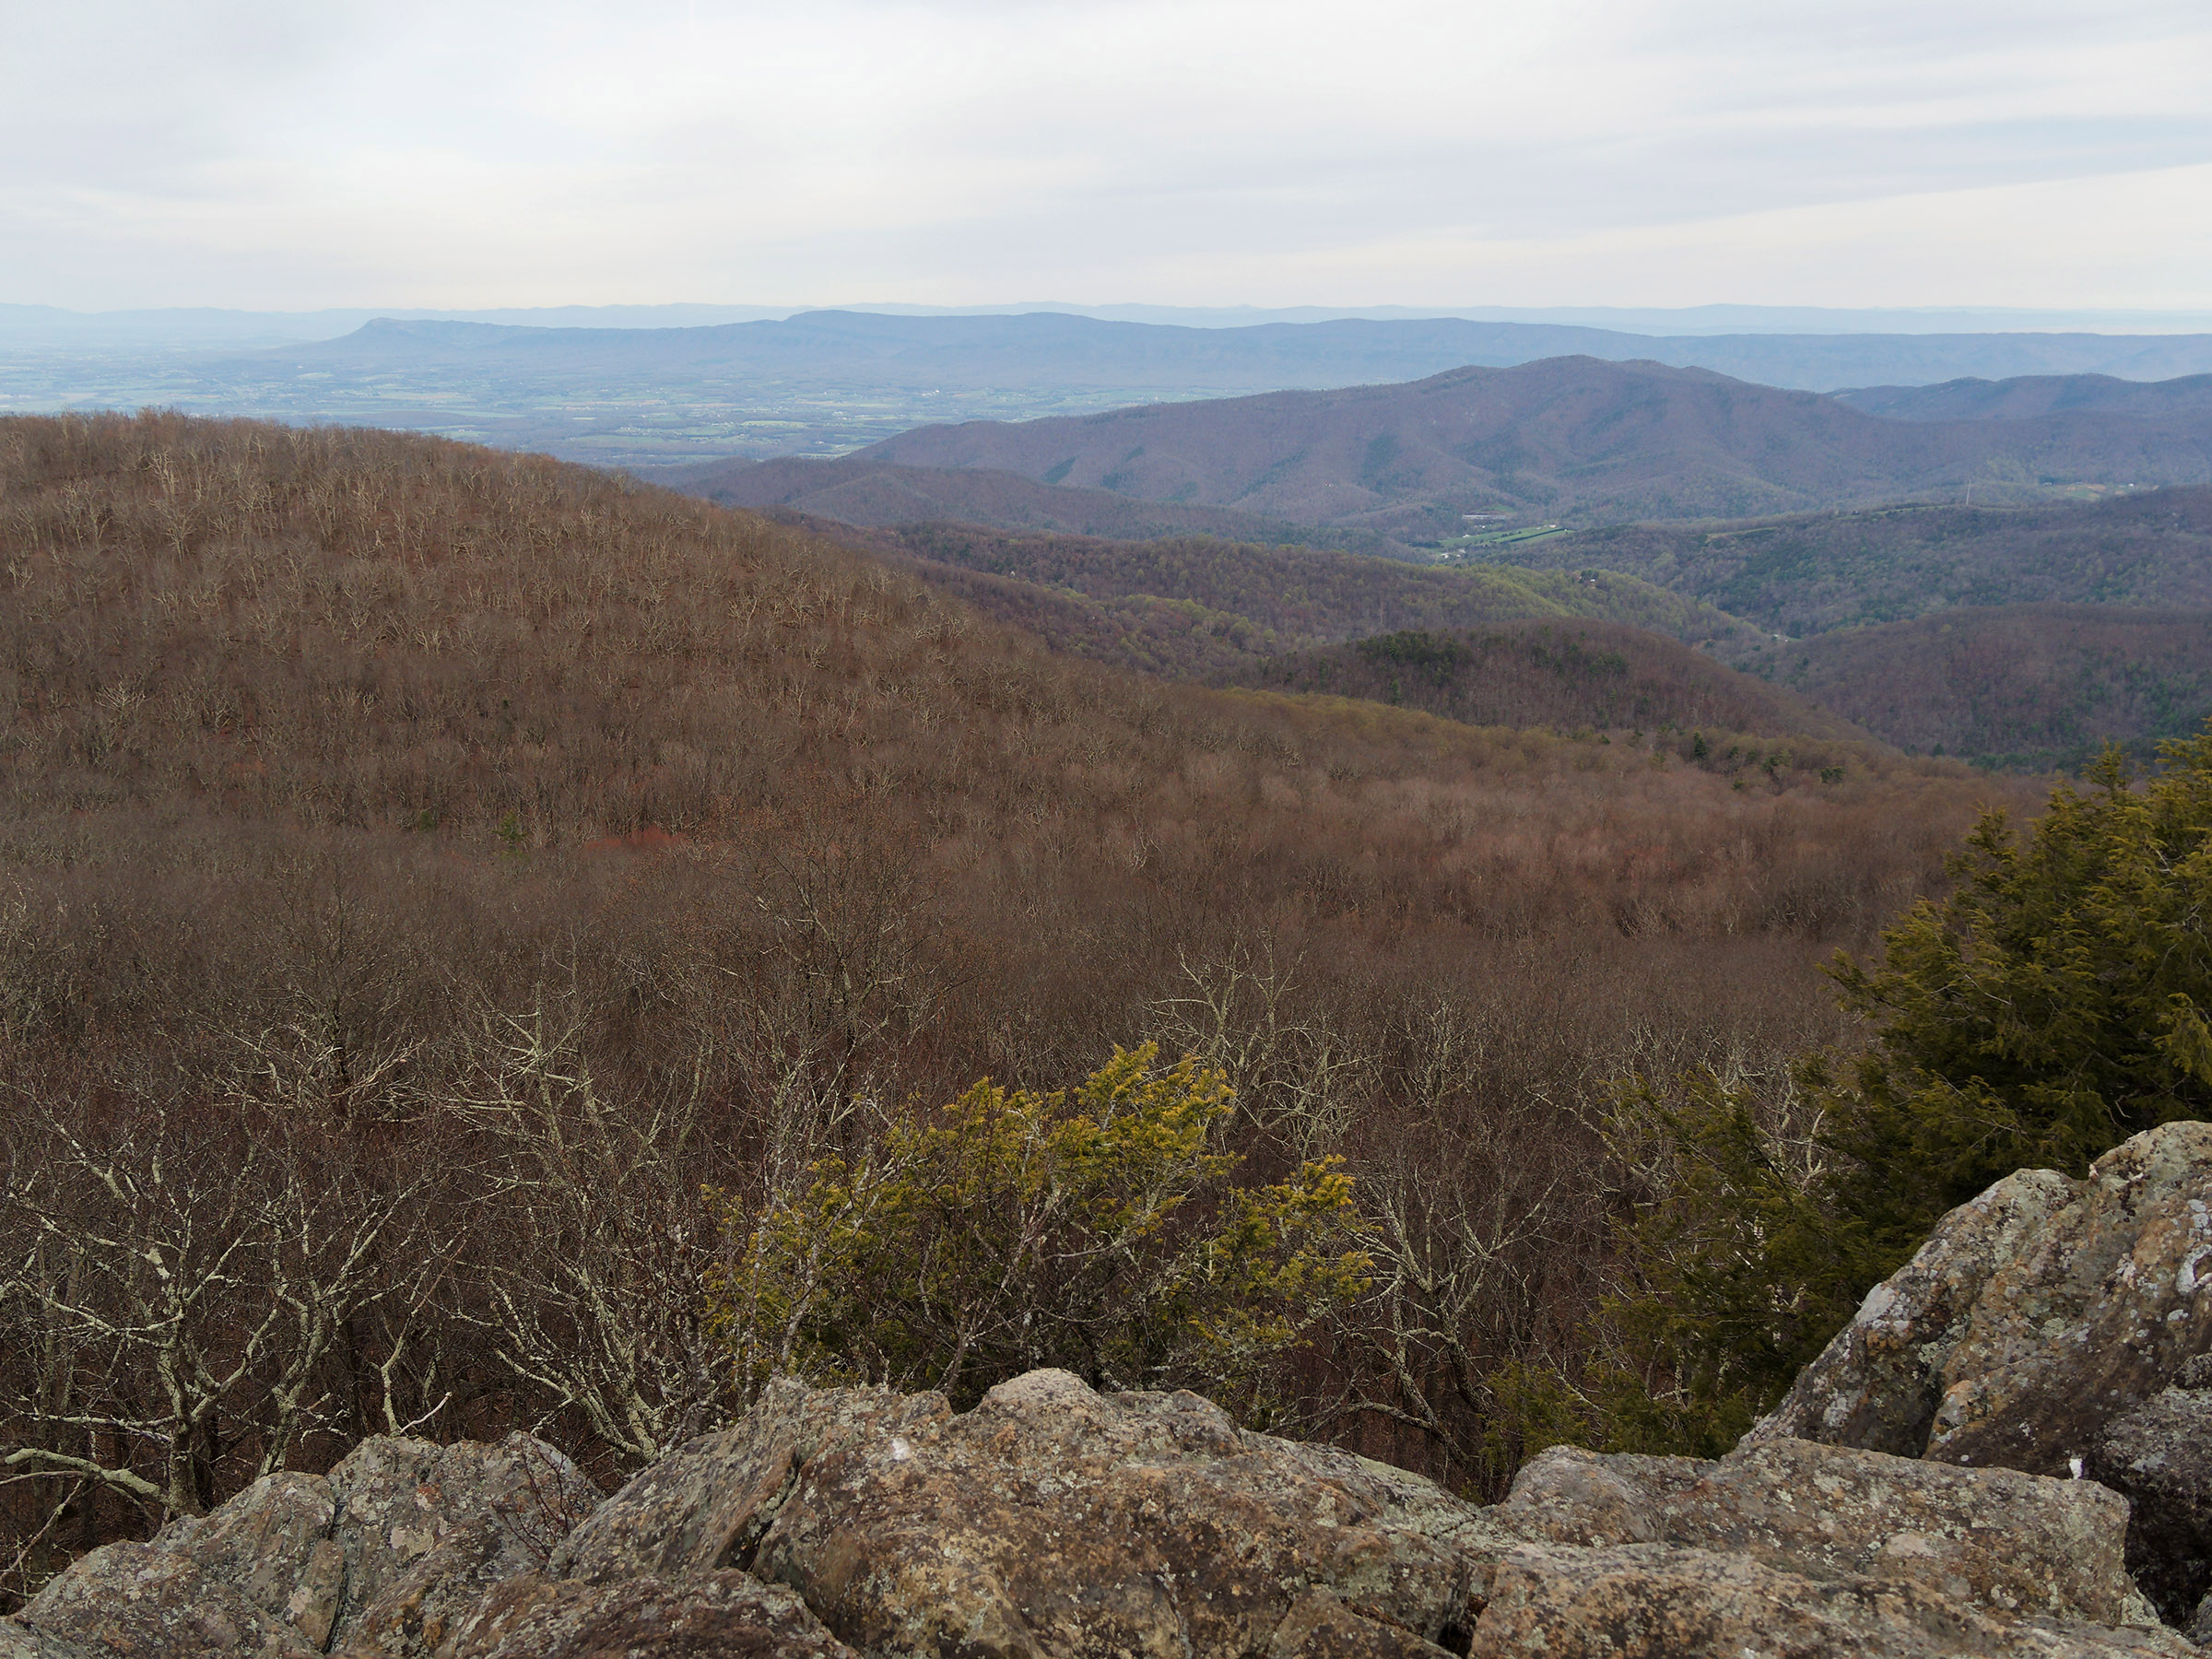 The view of Shenandoah Valley and Massanutten Mountain from Bearfence Mountain.